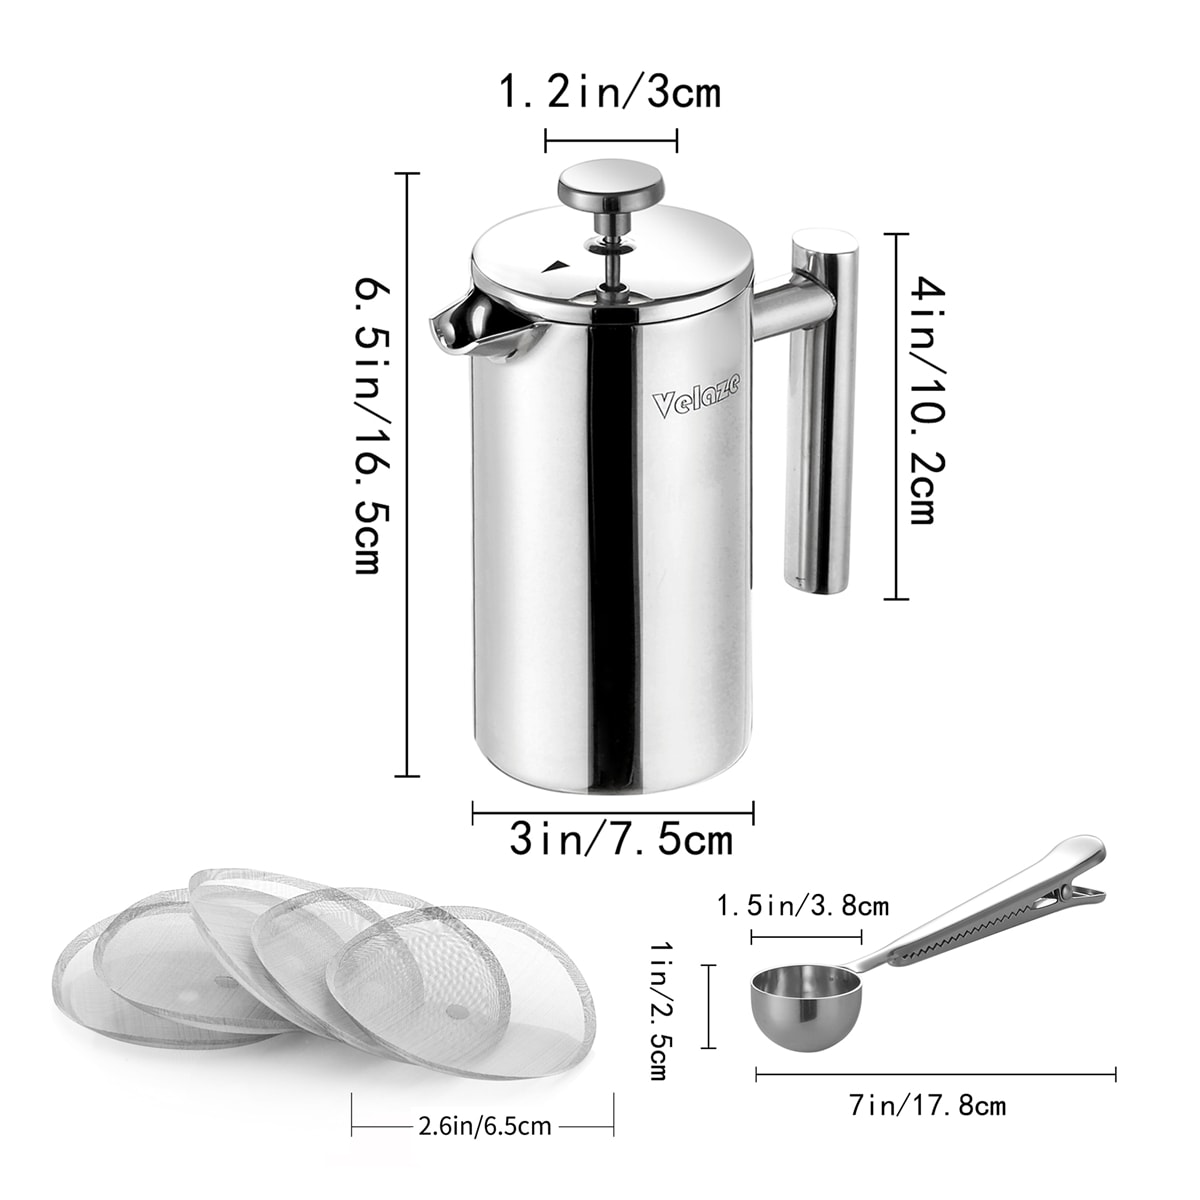 Zulay Kitchen - Premium French Press Coffee Pot and Milk Frother Set